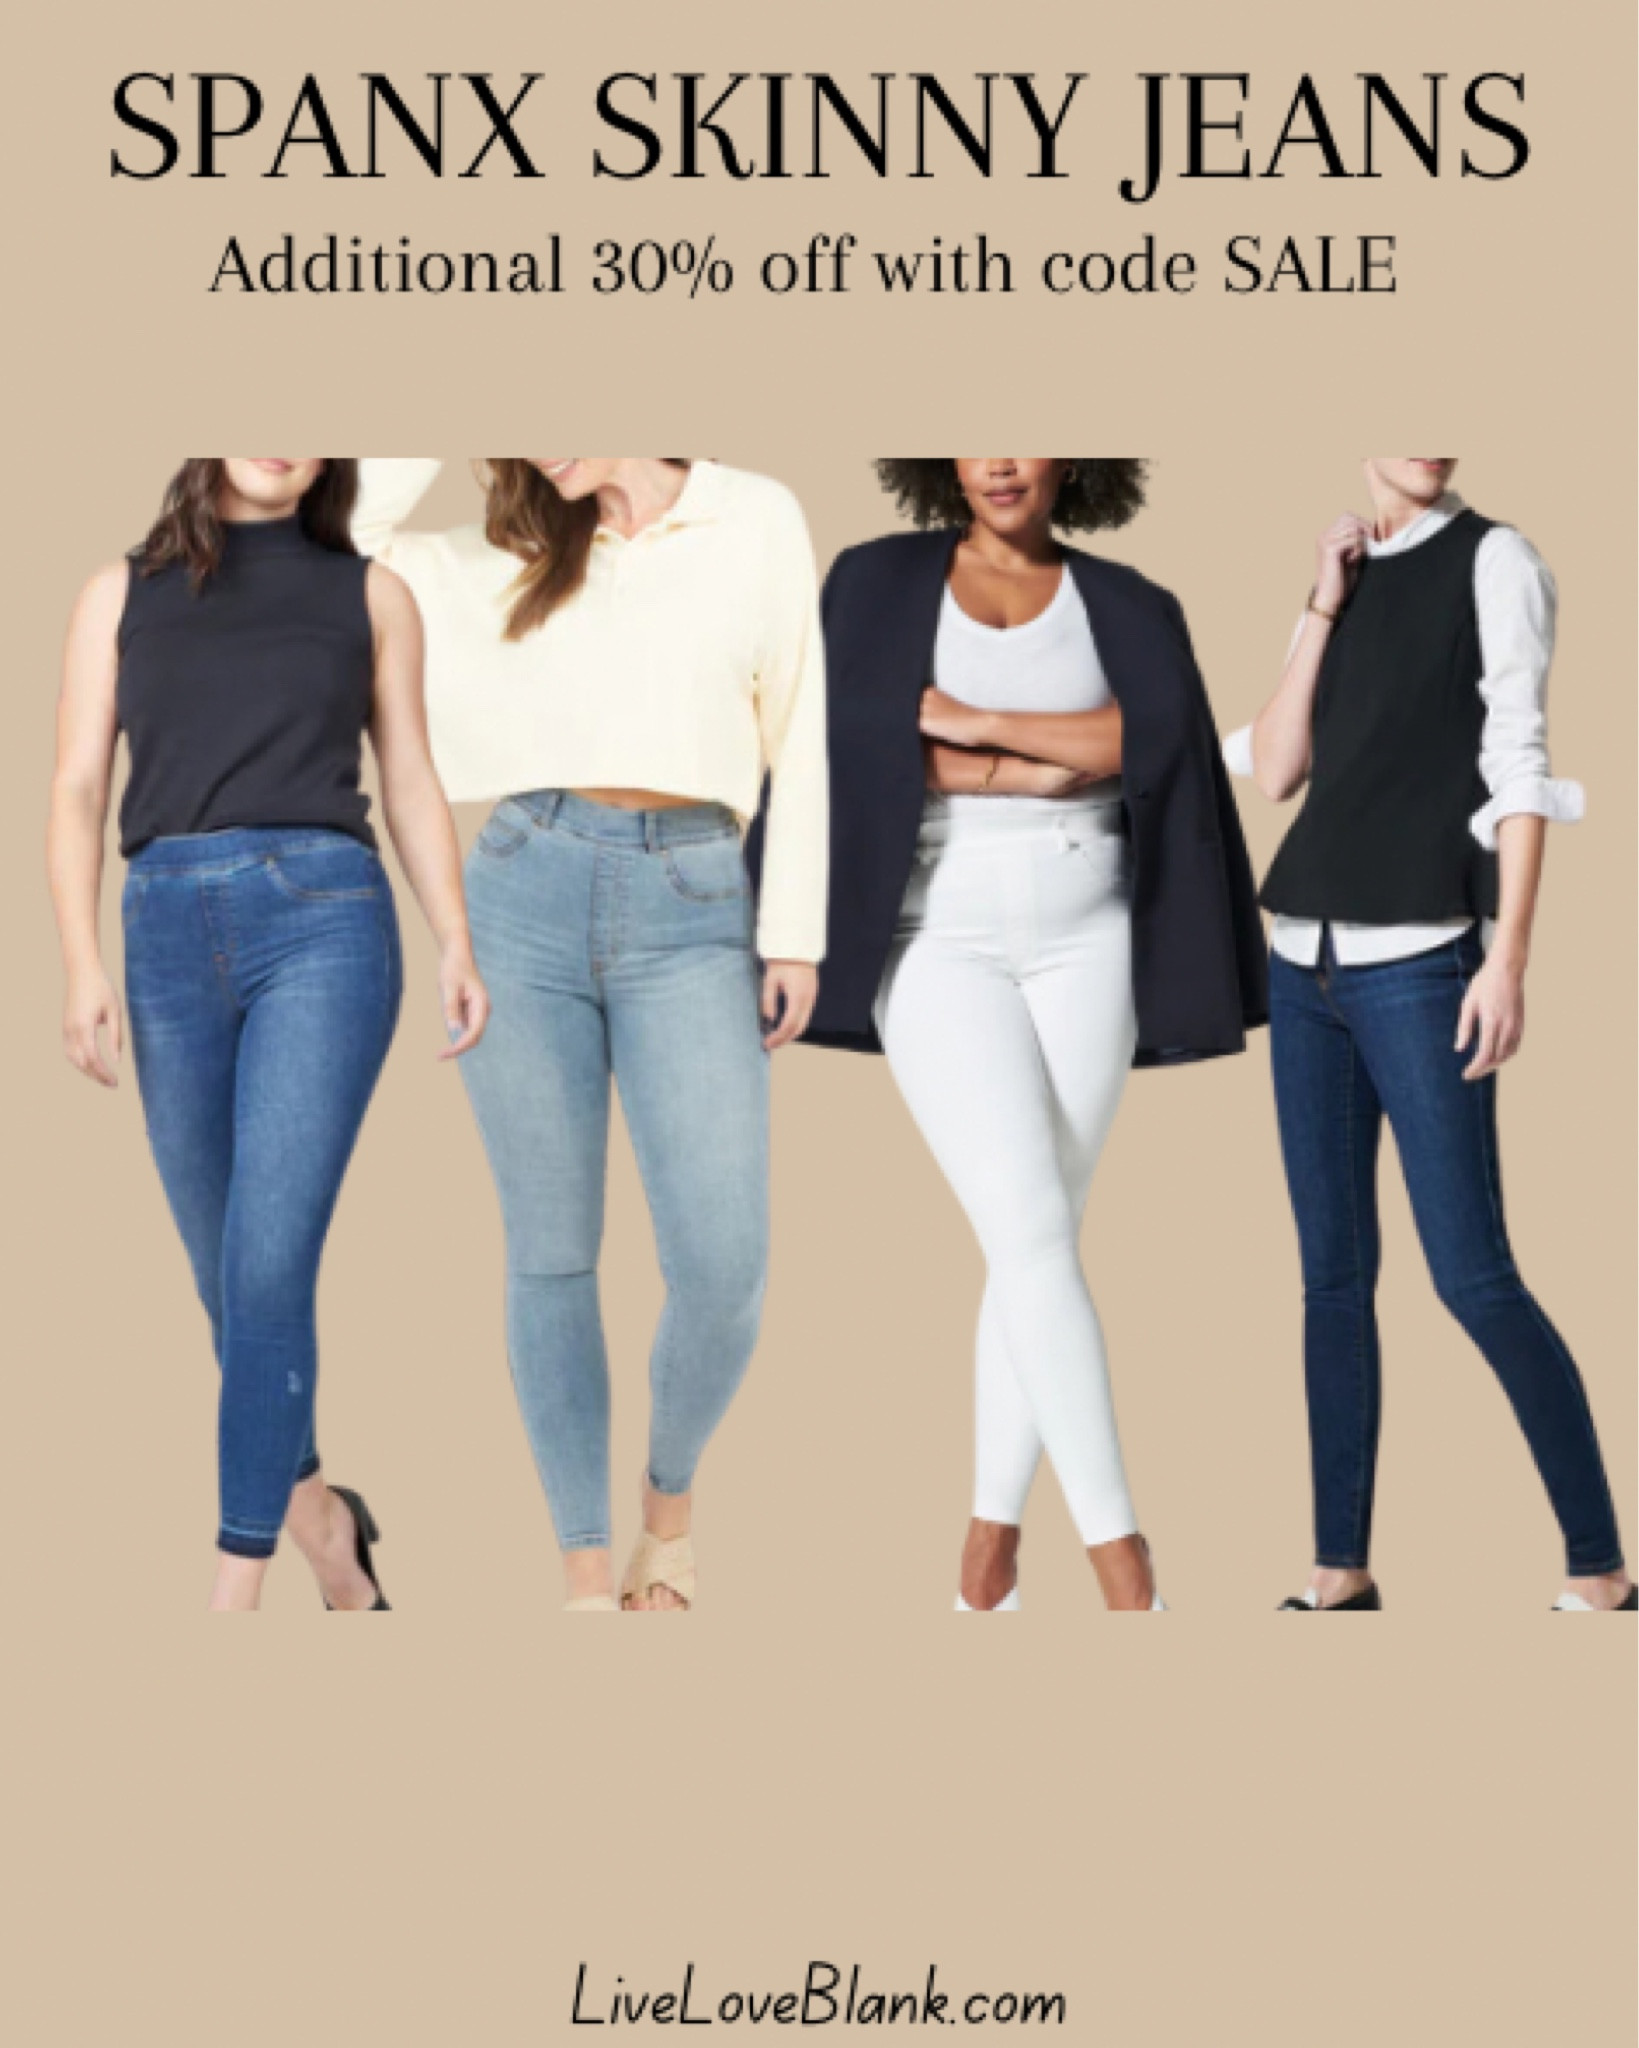 Spanx Is Having A Secret Sale For An Additional 30% Off Its Sale